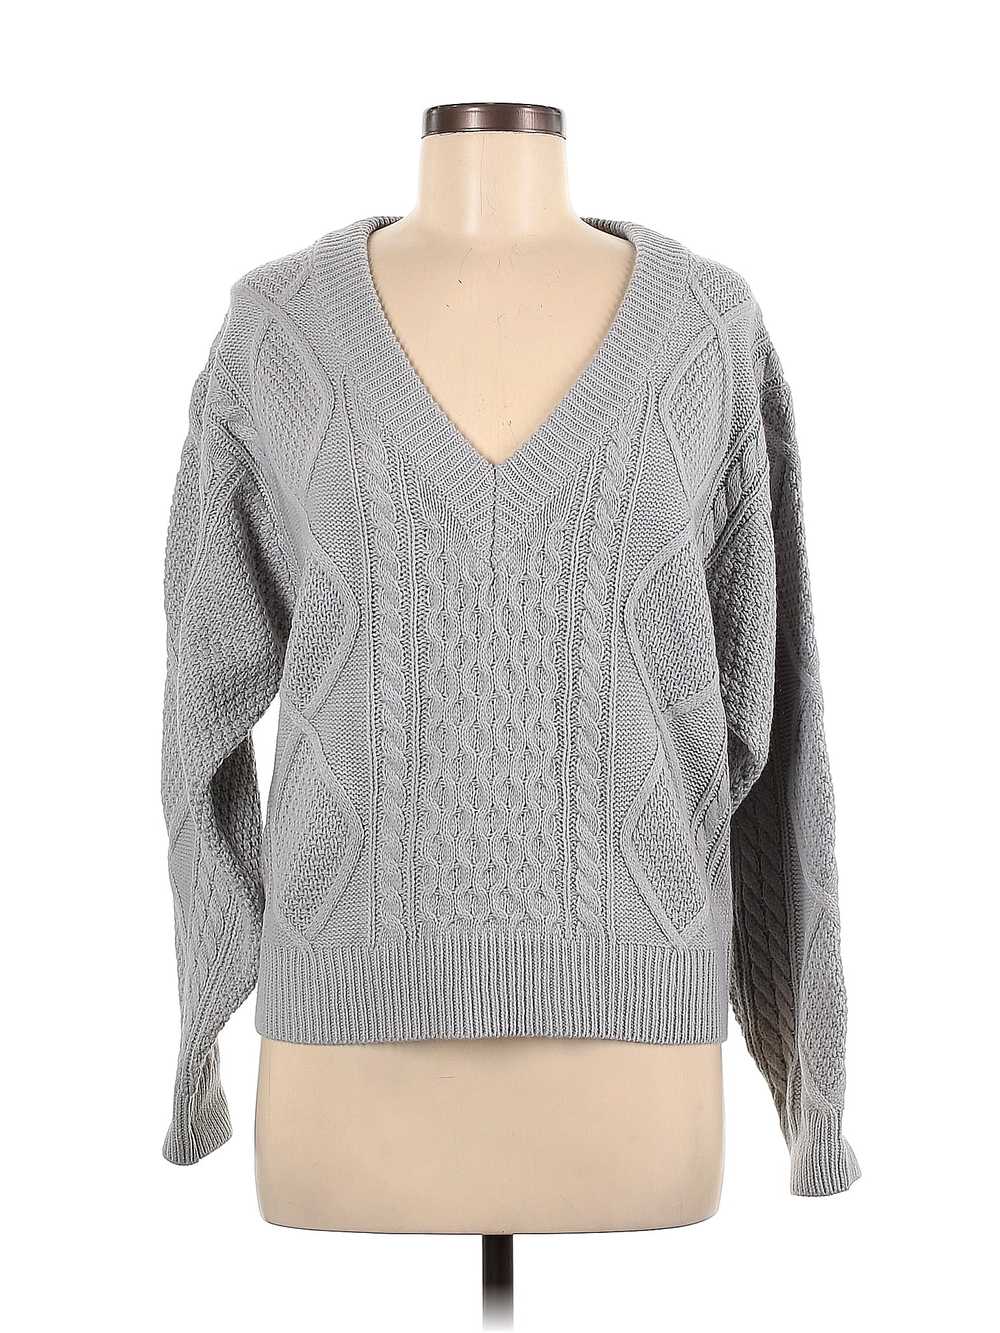 VICI Women Gray Pullover Sweater M - image 1